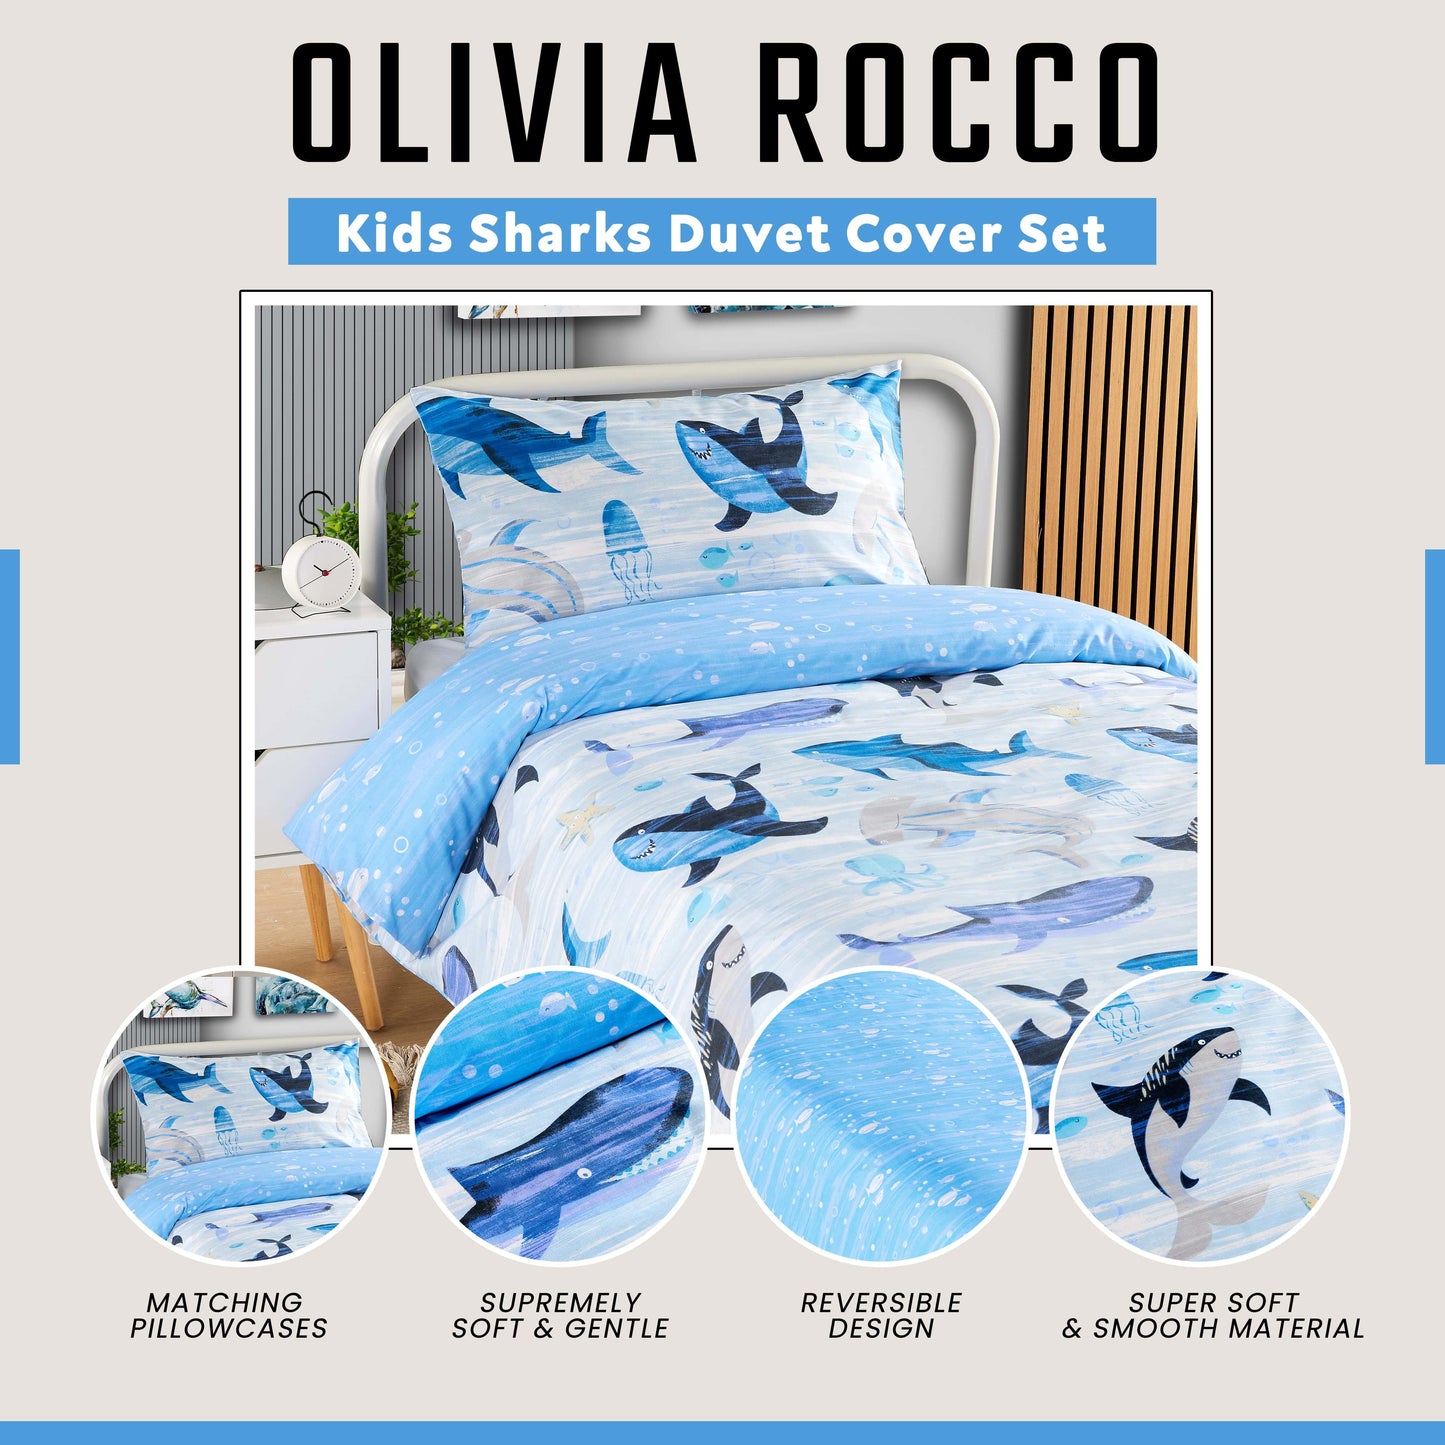 Sharks Duvet Cover Set Bedding for Kids Soft Cotton Reversible Design Quilt Bed Covers with Pillowcases OLIVIA ROCCO Duvet Cover